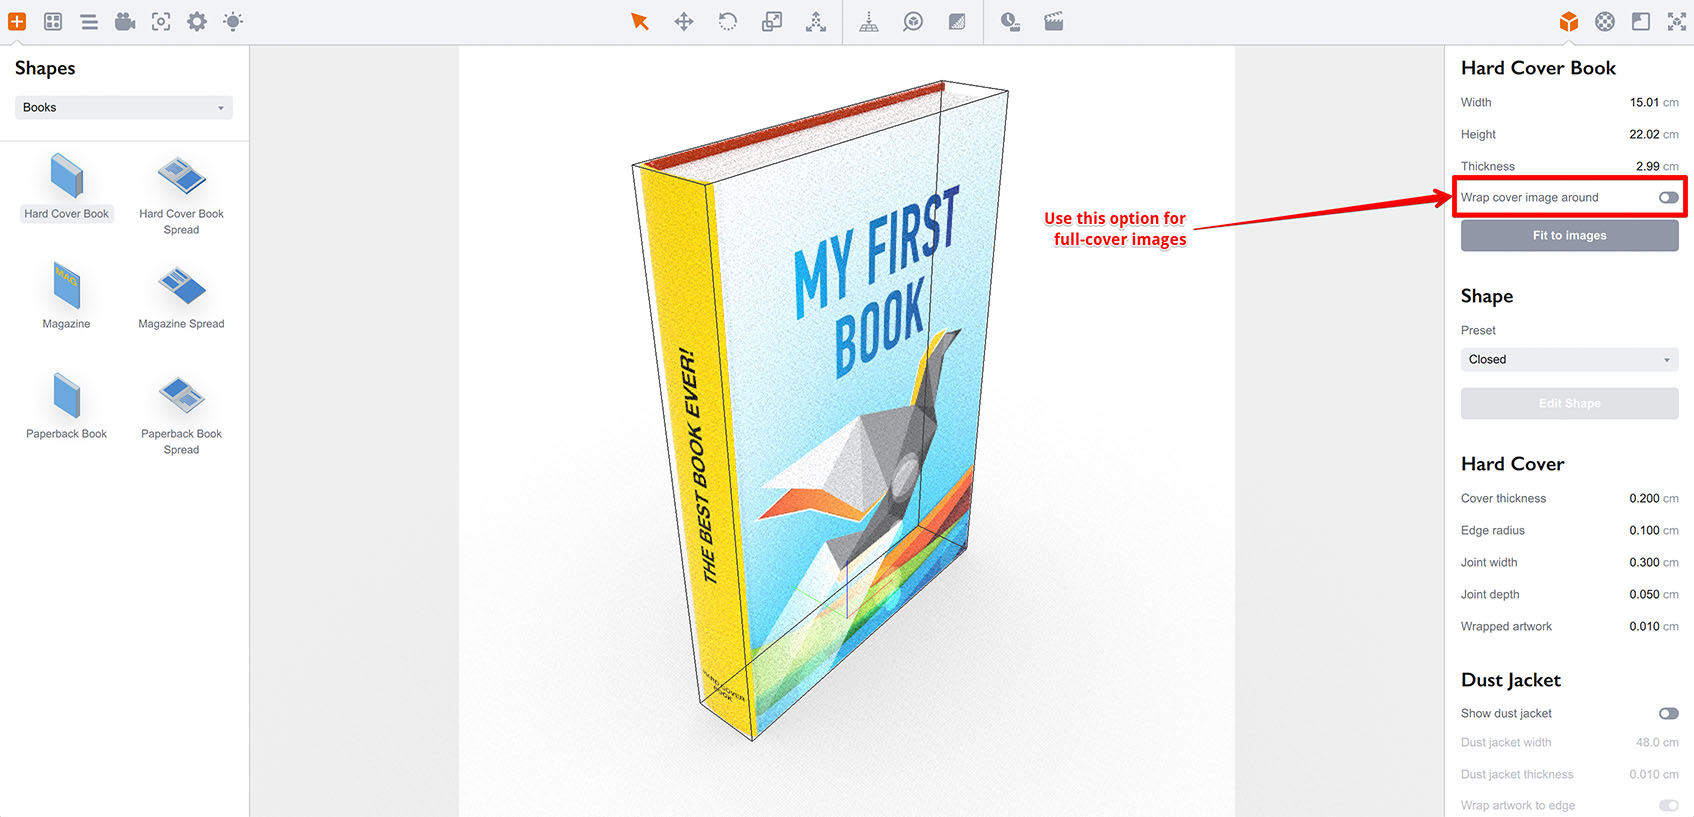 Wrap cover images around option for 3D books